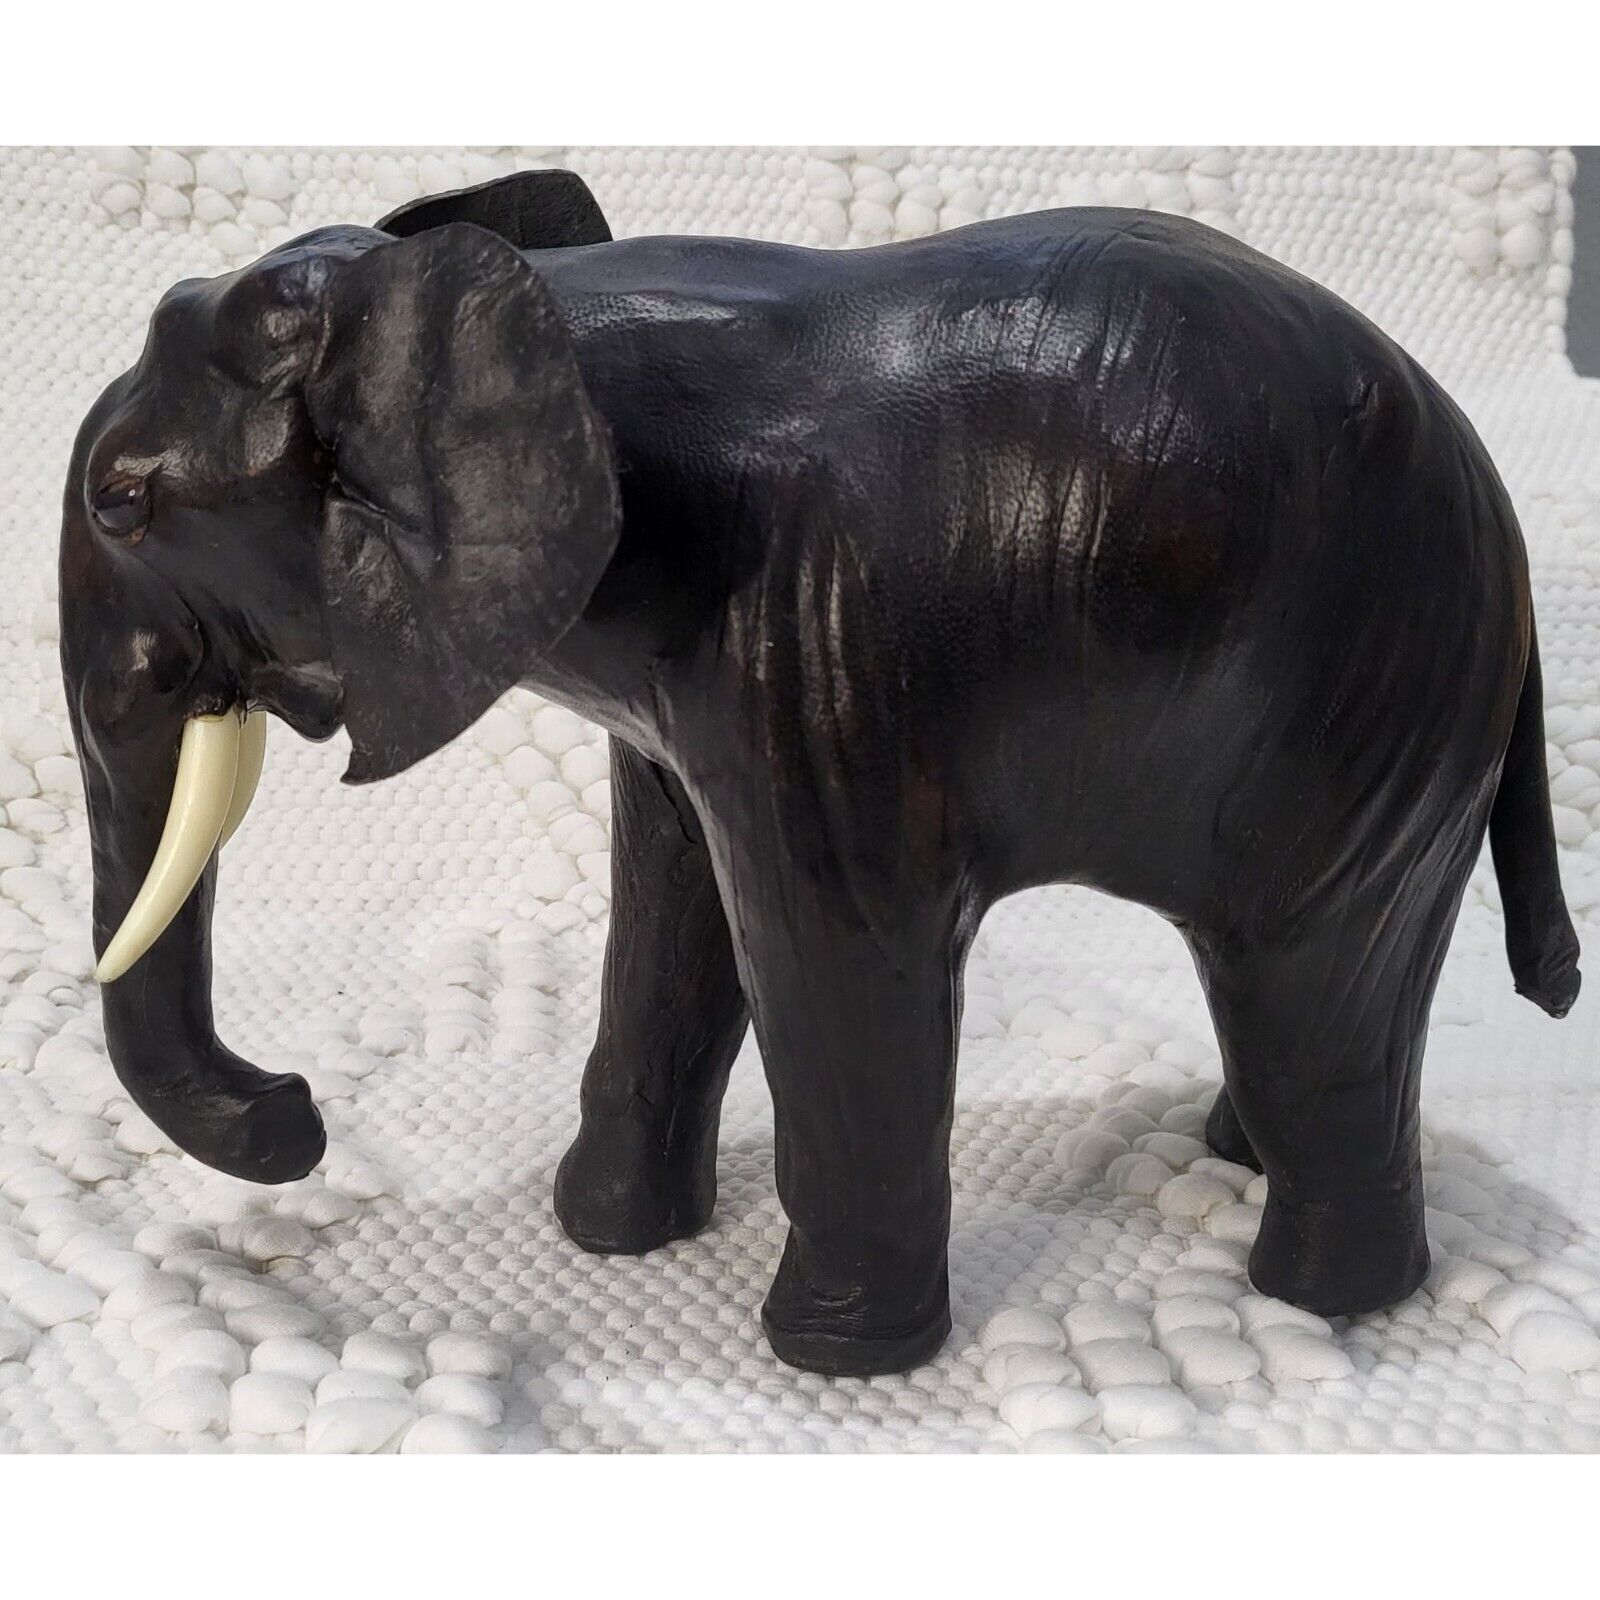 Leather Covered Elephant Statue - Hand Crafte Pachyderm Art Sulpture - Vintage